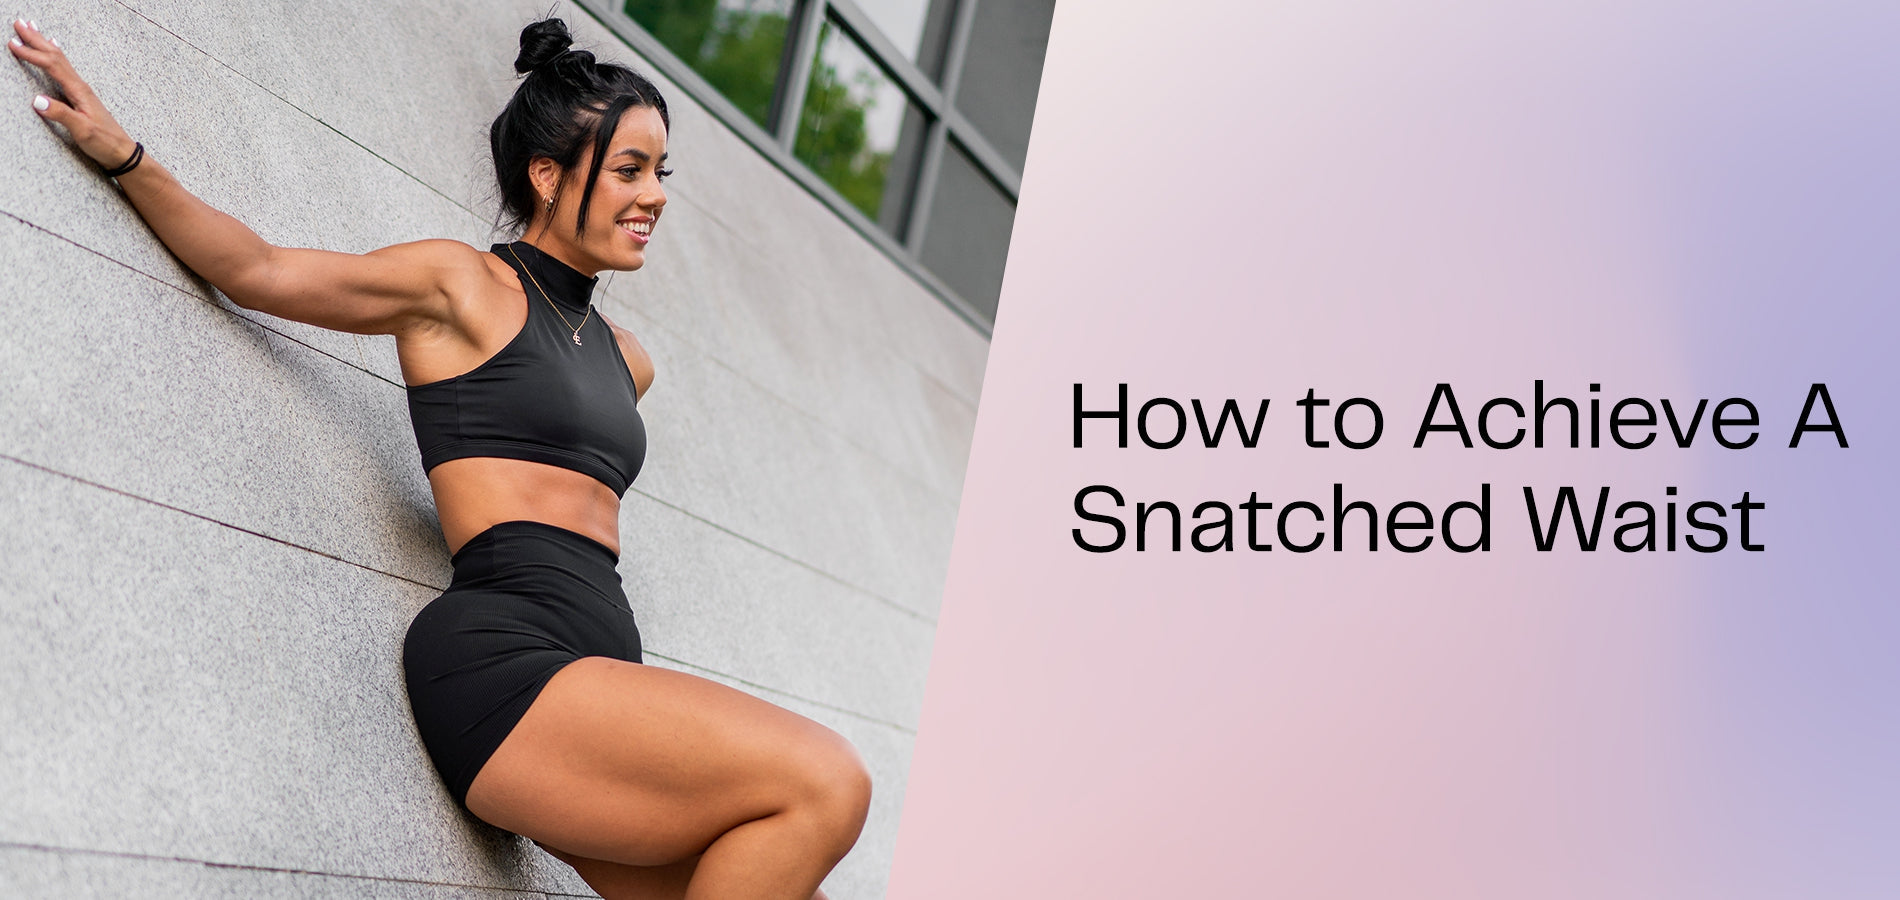 How To Achieve a Snatched Waist-WBK FIT